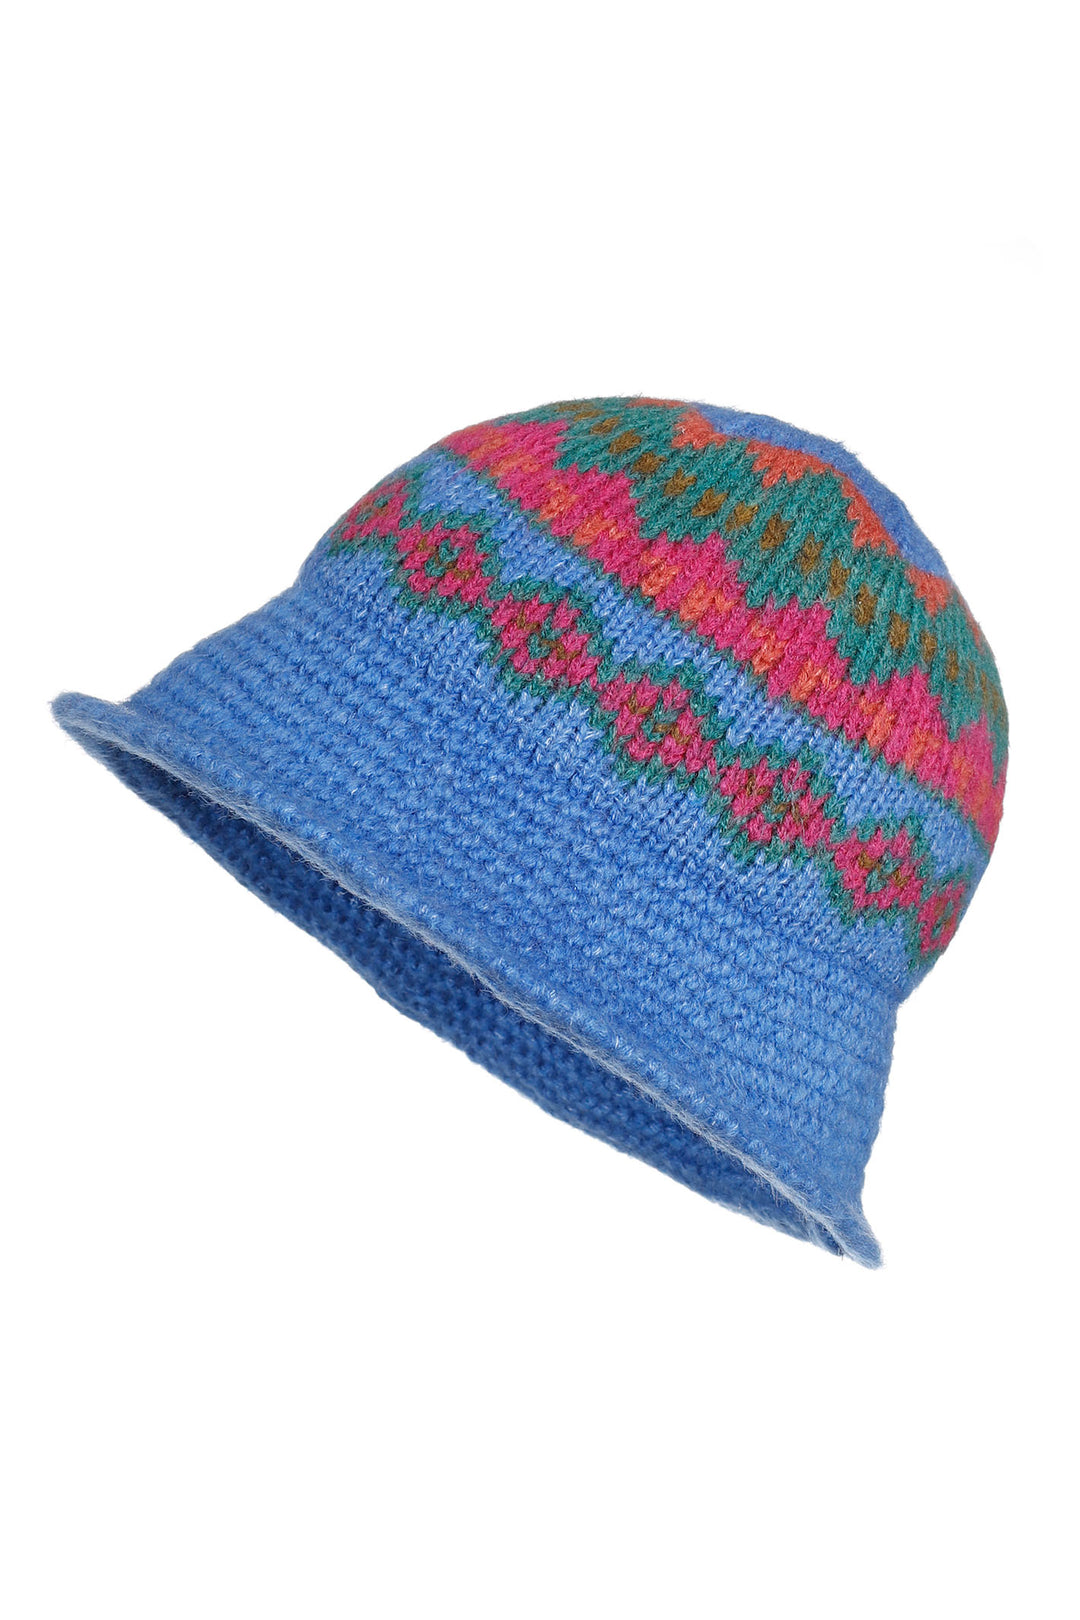 Fonem FO 2707 Sax Blue Knitted Hat - Shirley Allum Boutique